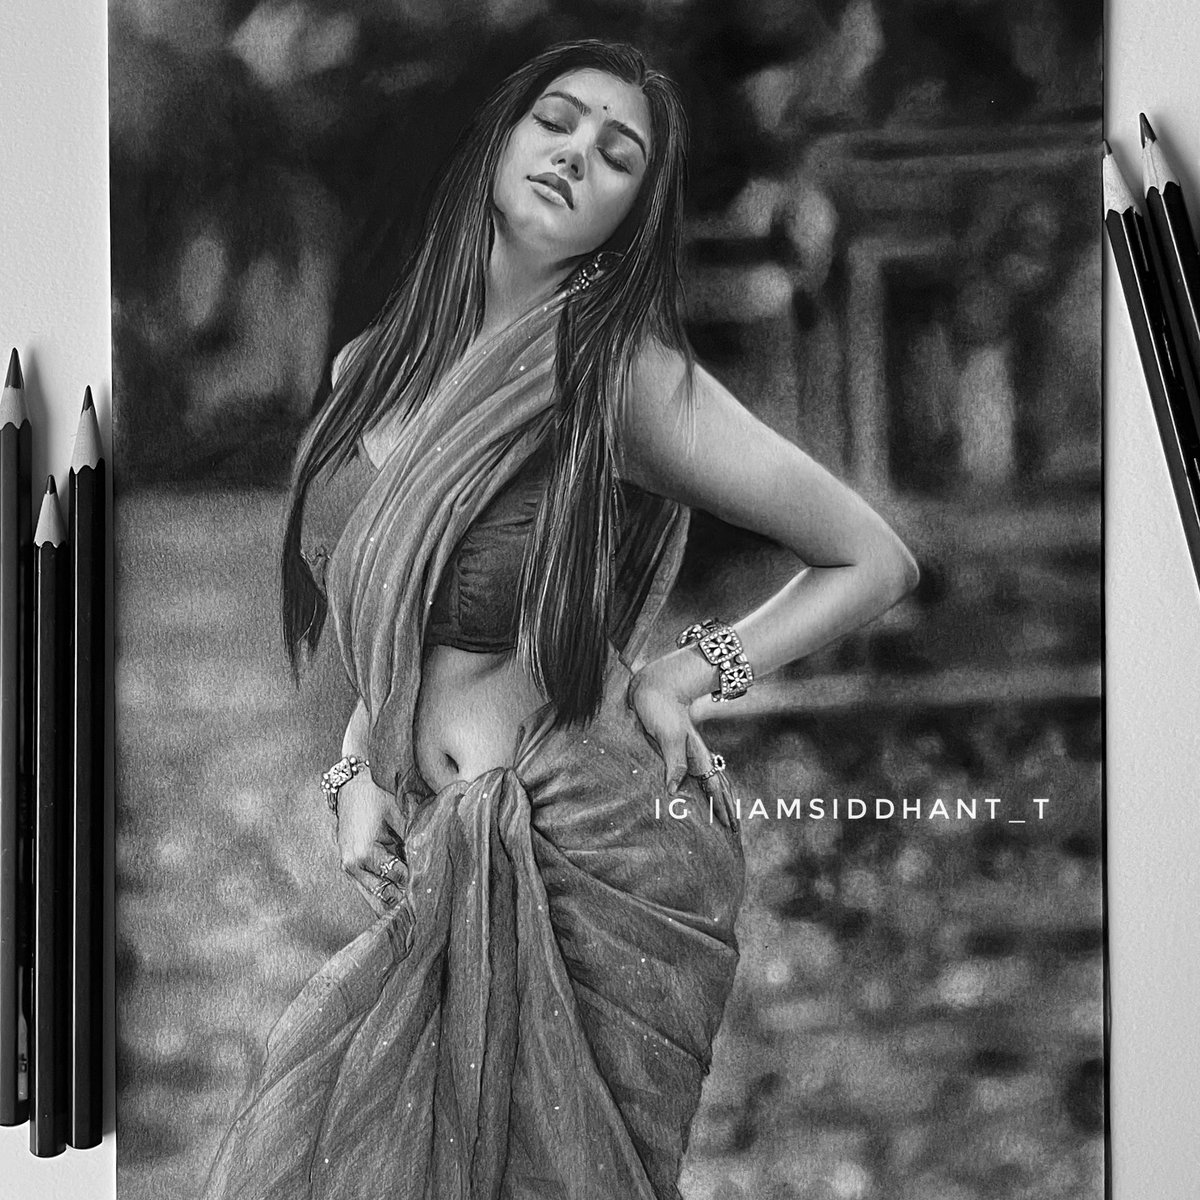 Graphite + Charcoal Drawing 🌸✍️ #drawing #art #sketch #illustration #draw